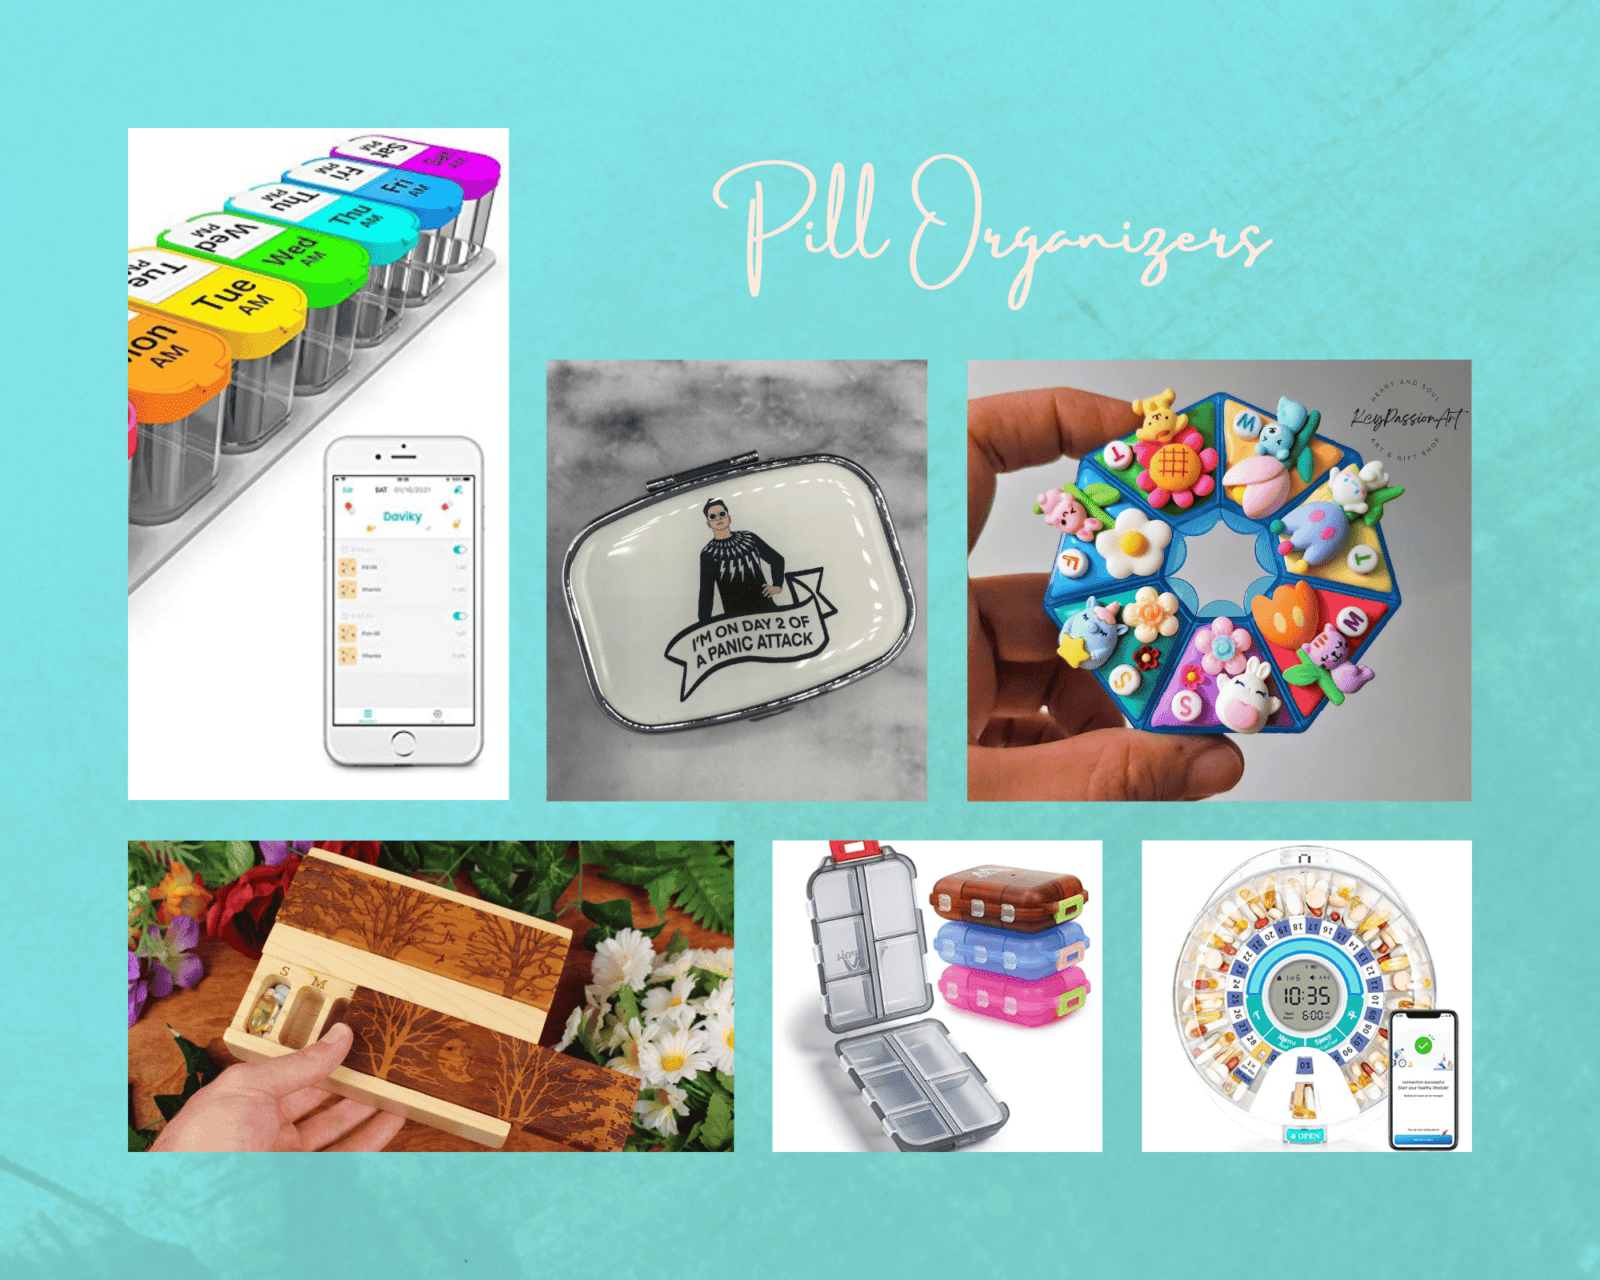 Pill organizers - collage of medication boxes with compartments